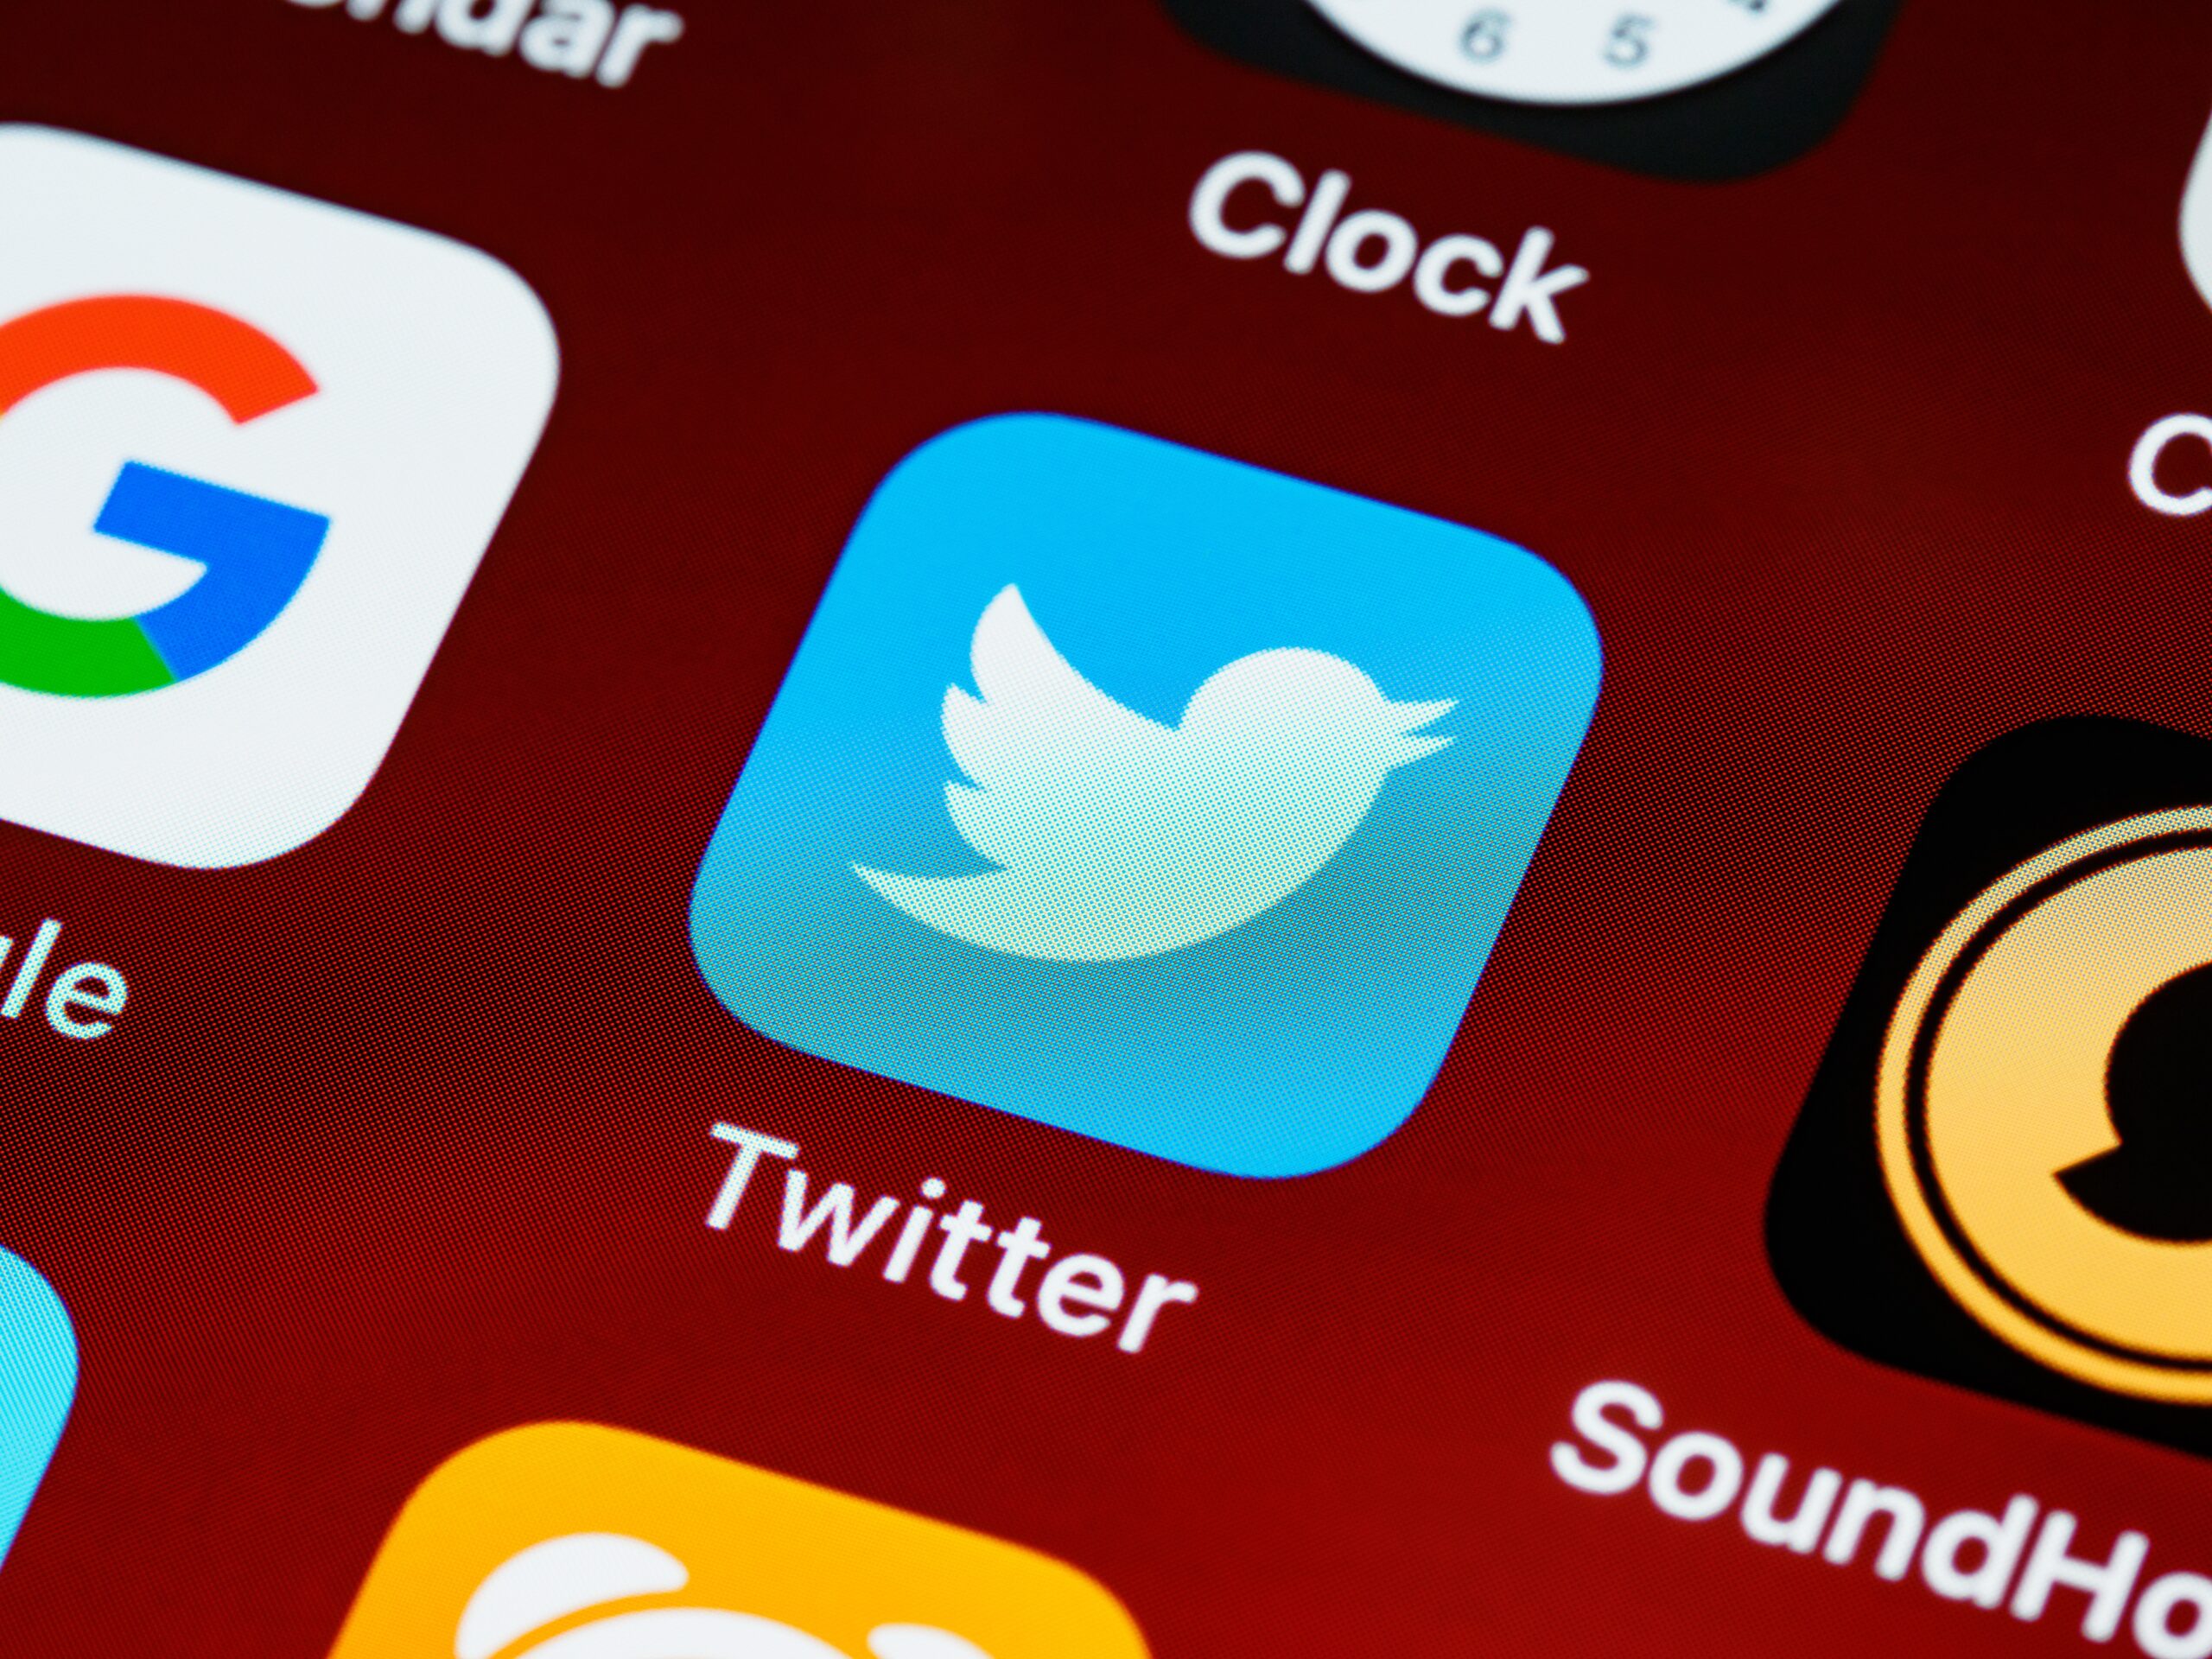 Twitter’s new ‘tweet counter’ will track your excessive posts